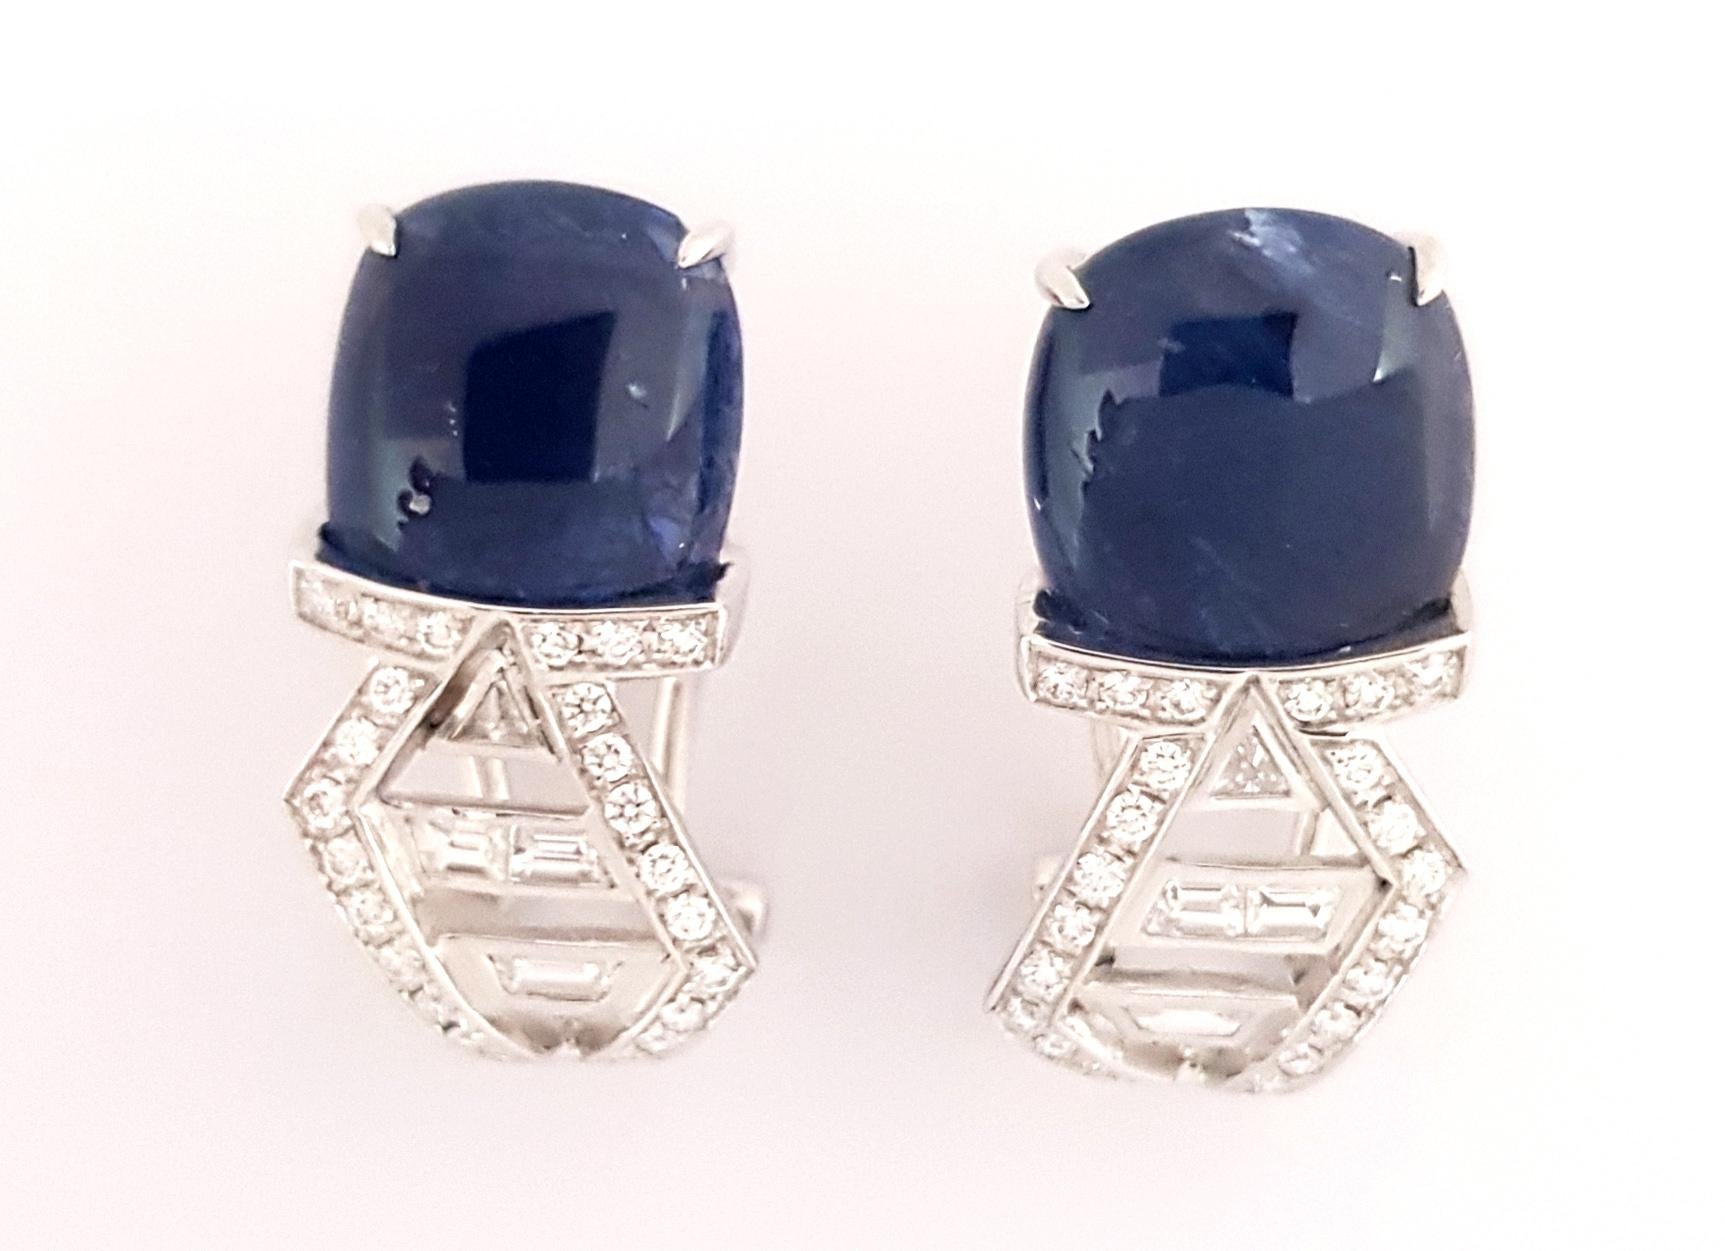 Cabochon Blue Sapphire 11.21 carats with Diamond 0.66 carat Earrings set in 18K White Gold Settings

Width: 0.7 cm
Length: 2.4 cm
Weight: 6.06 grams

The ancient Japanese tradition of paper folding has inspired the form and elements of this modern